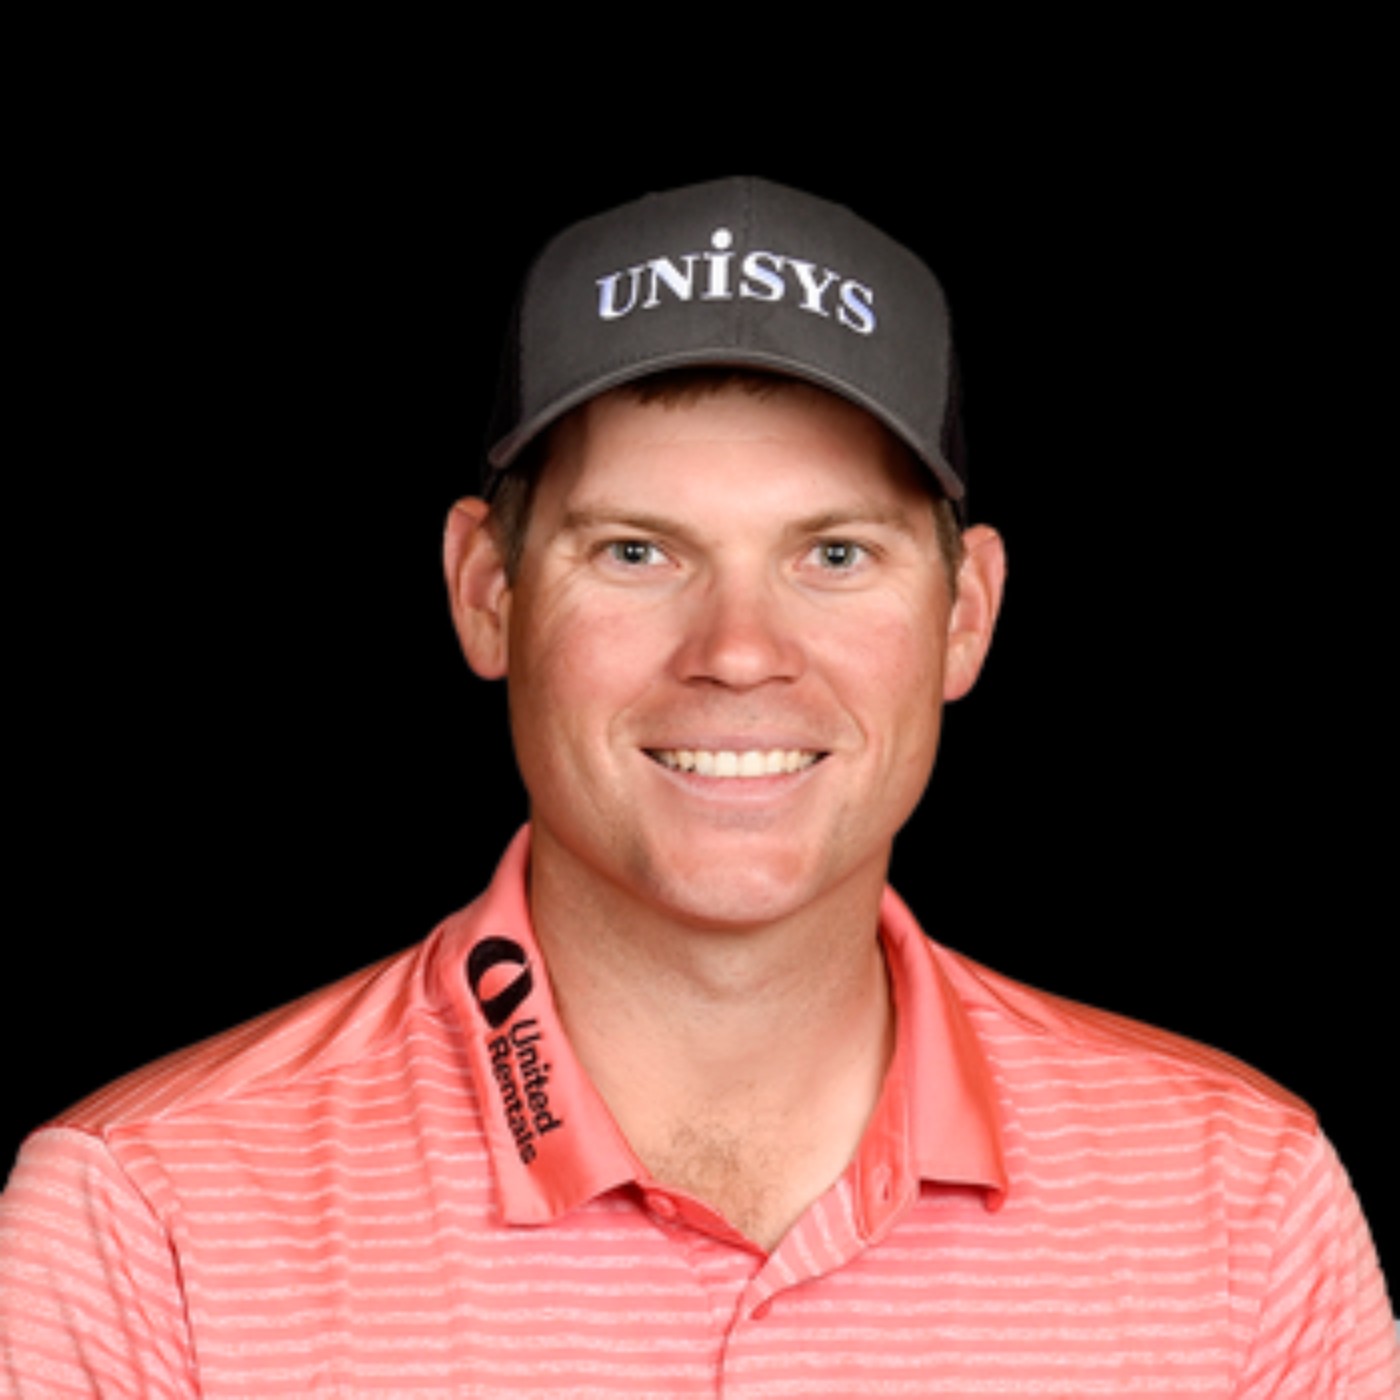 Ep. 126 - Adam Schenk - The Mental Game Process Needed on the PGA Tour